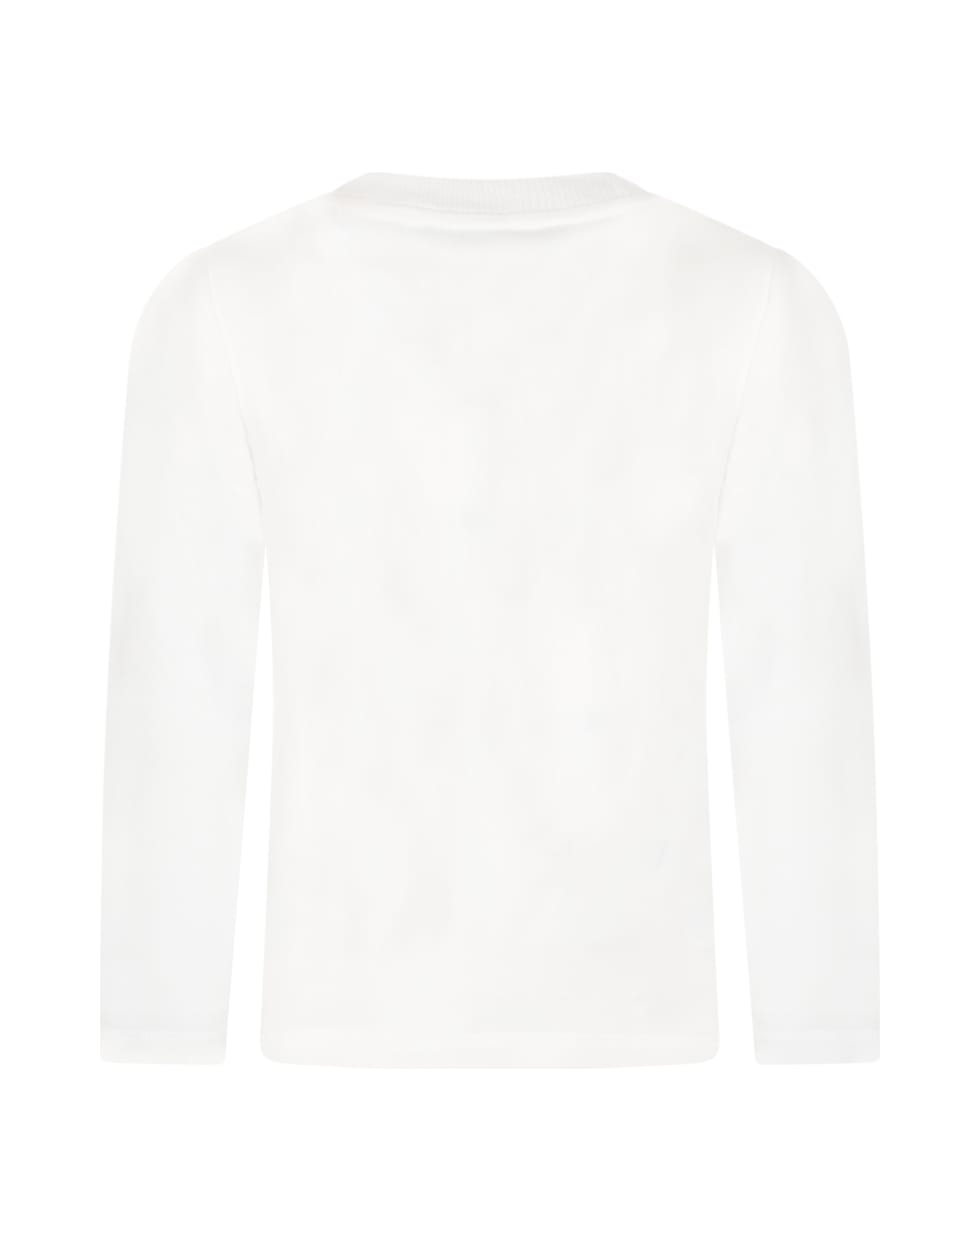 Moschino White T-shirt For Kids With Teddy Bear - Panna